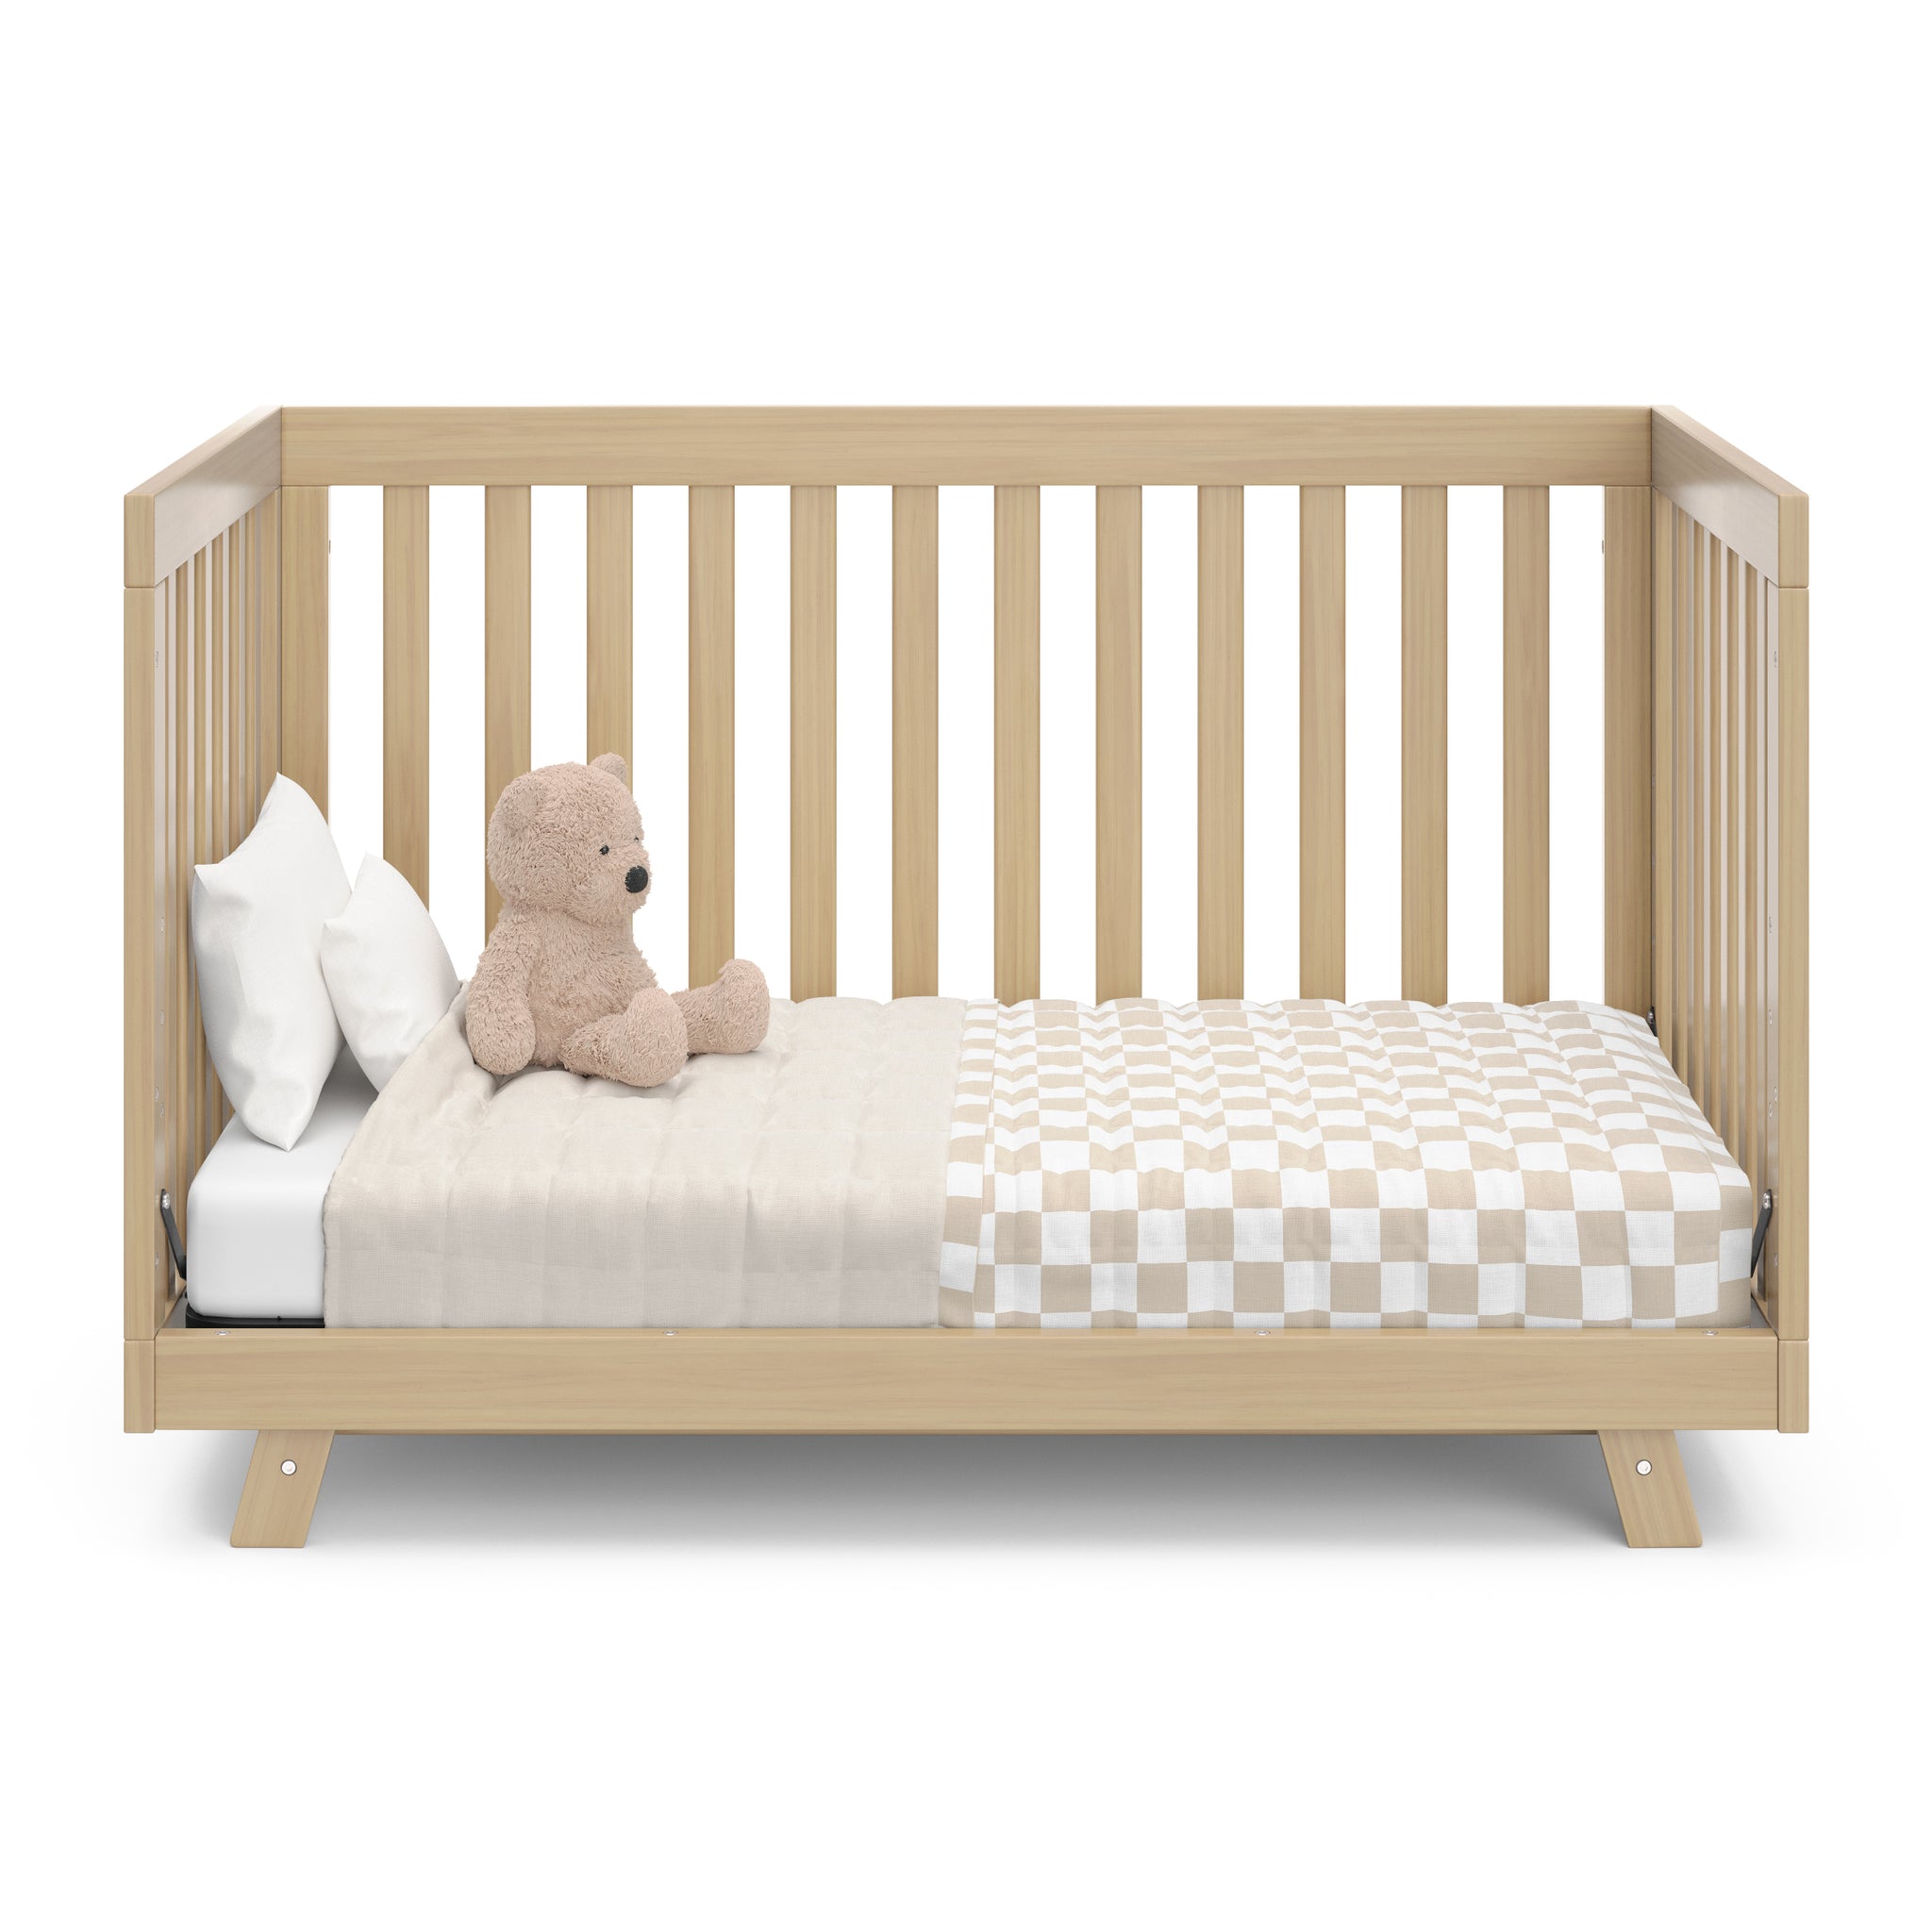 Front view of Driftwood Crib in toddler bed conversion 